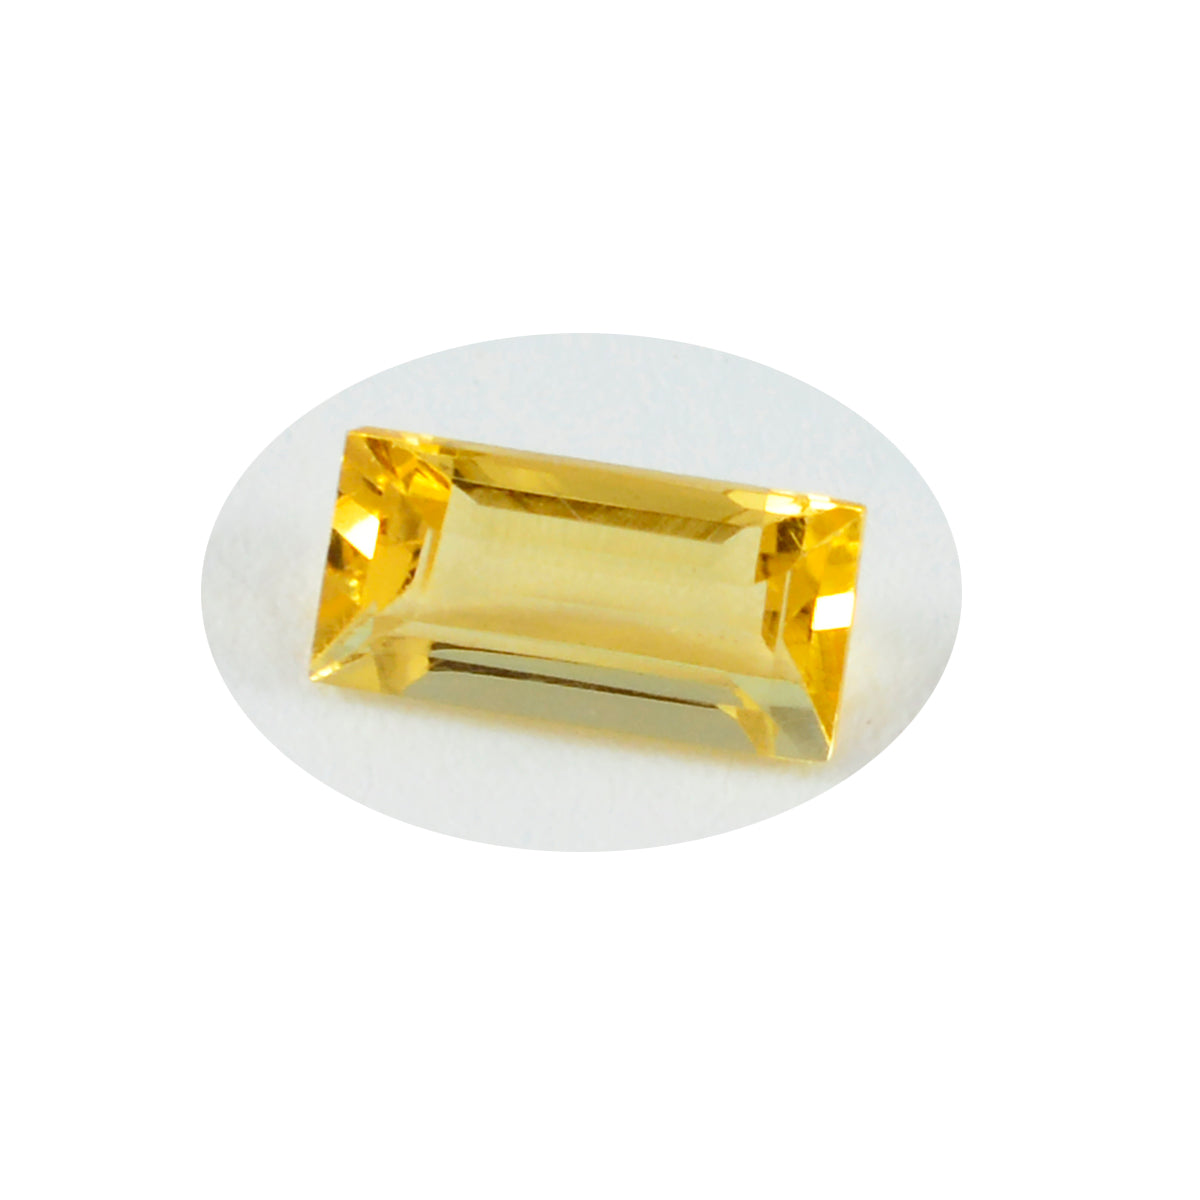 Riyogems 1PC Real Yellow Citrine Faceted 8x16 mm  Baguette Shape cute Quality Loose Gemstone